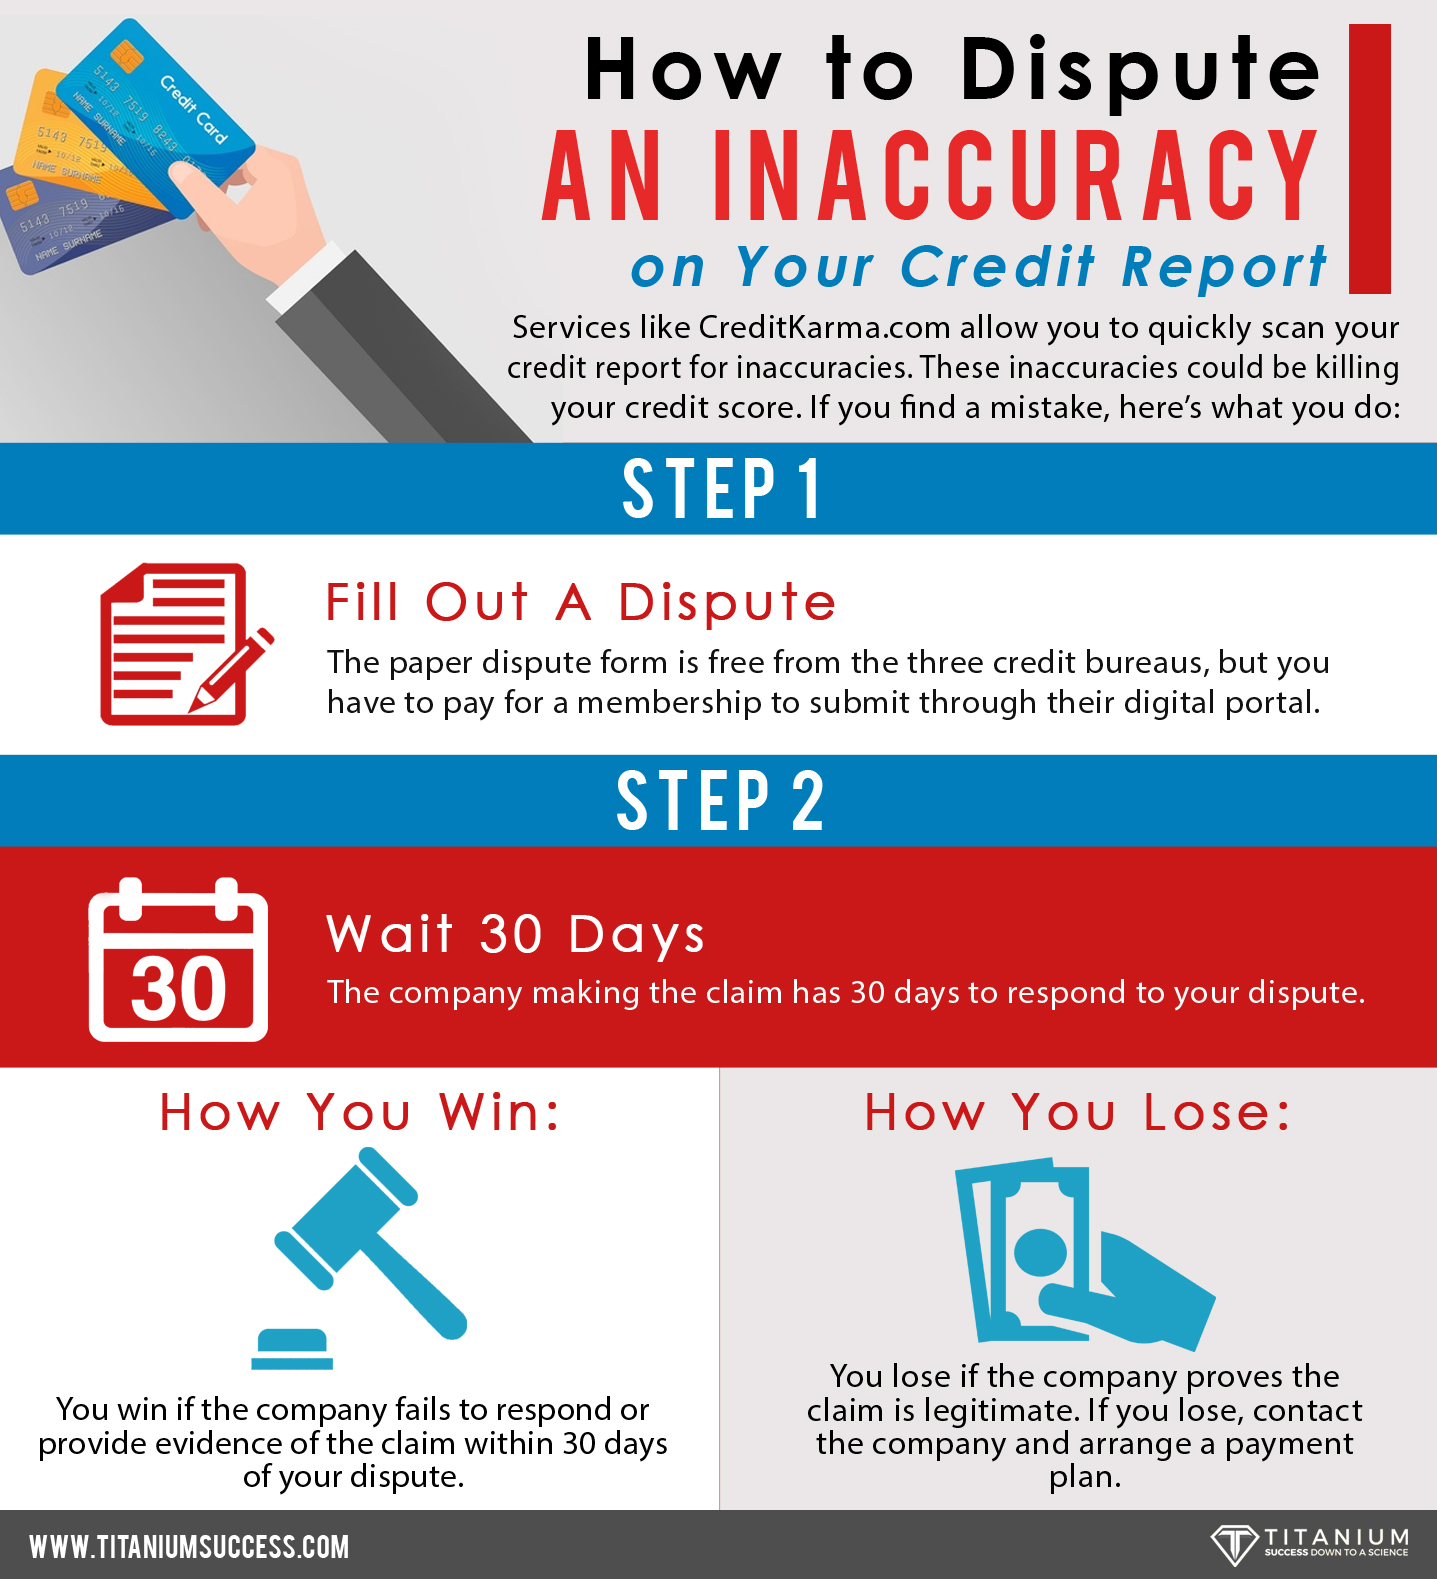 How to Dispute an Inaccuracy on Your Credit Report Infographic - TS